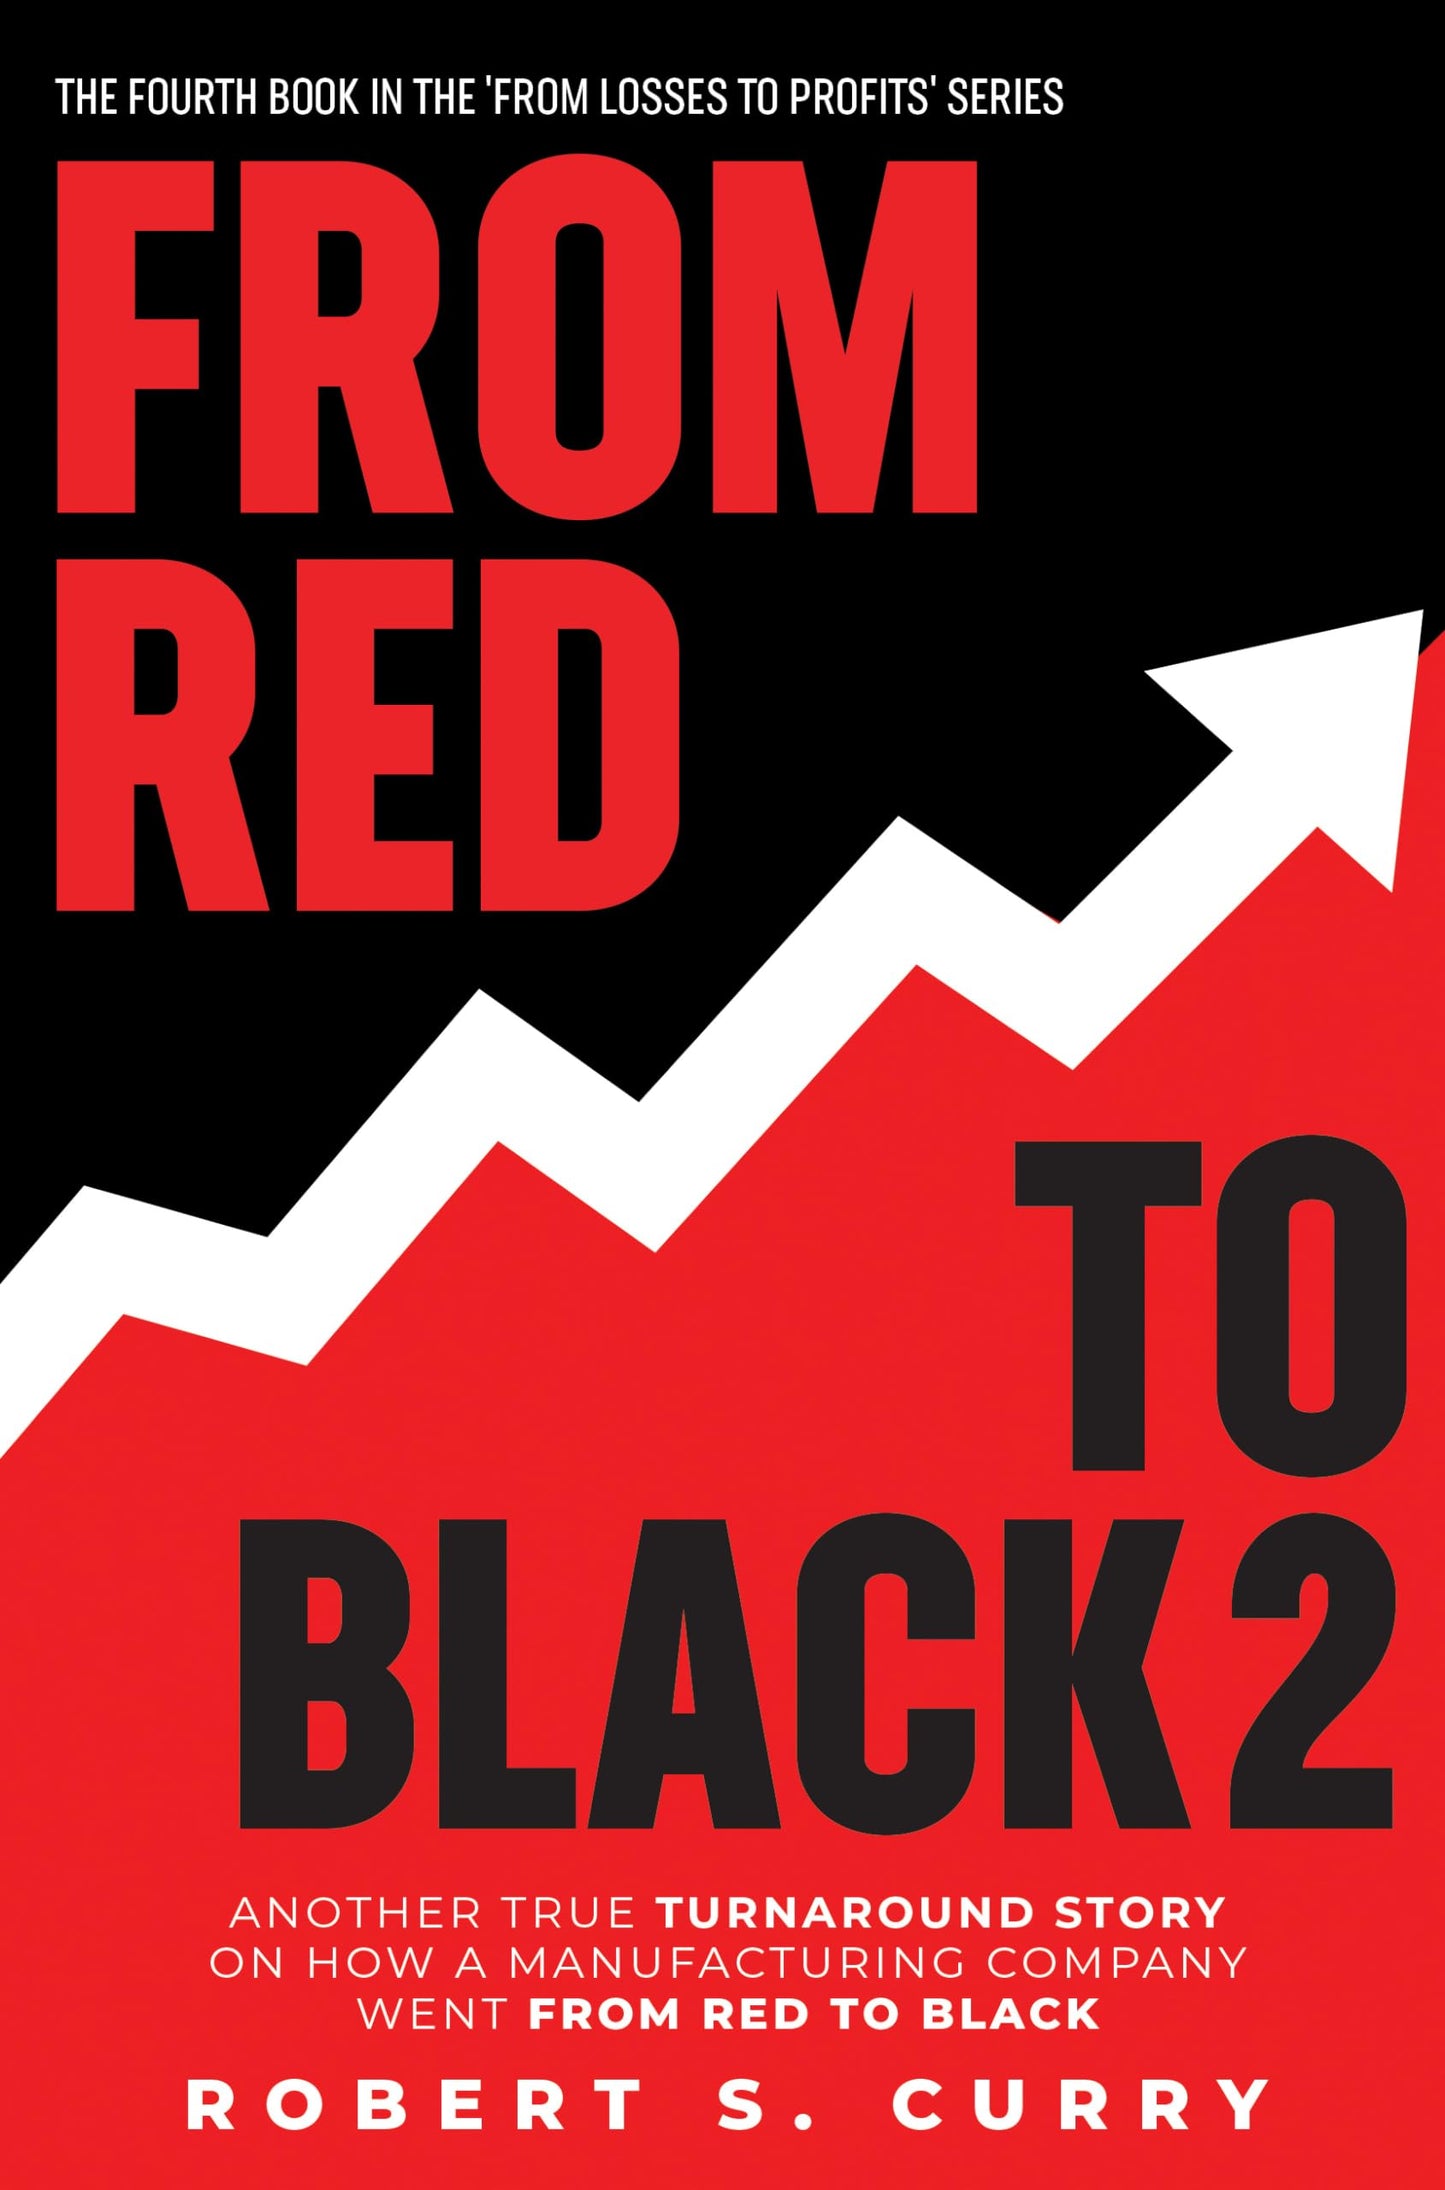 From Red To Black 2: Another True Turnaround Story on How A Manufacturing Company Went from Red to Black (Losses to Profits Series)